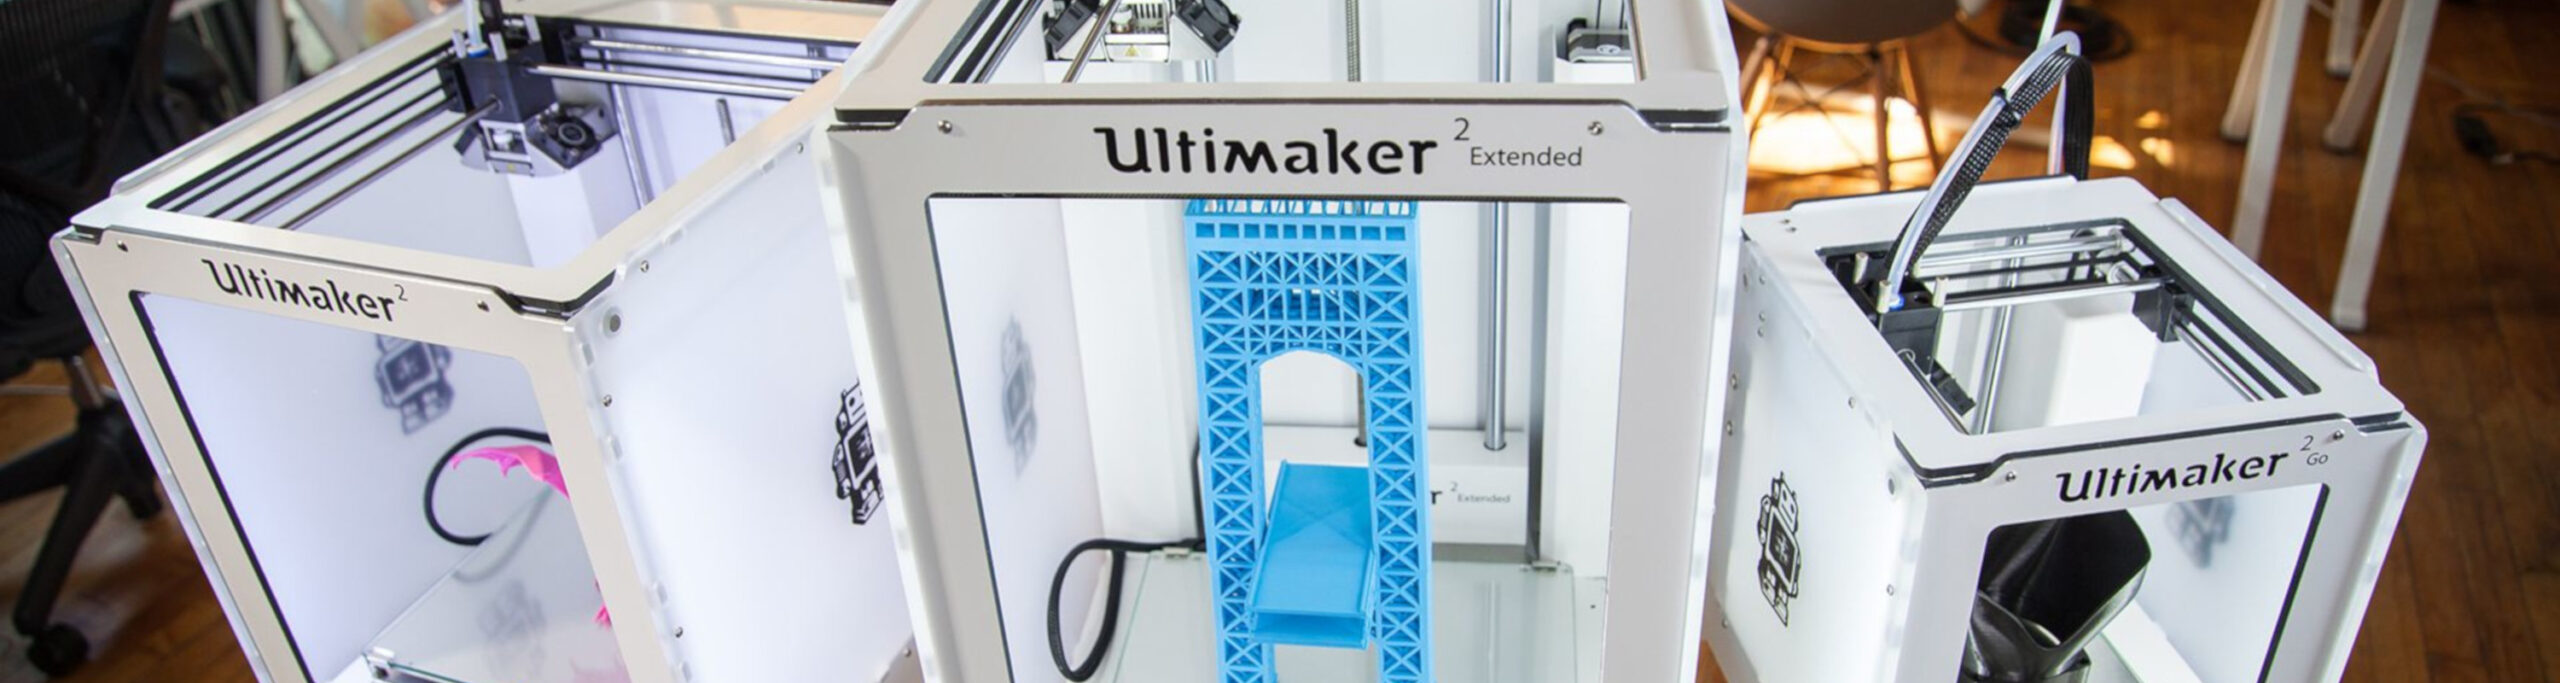 ultimaker 2 family of 3d printers